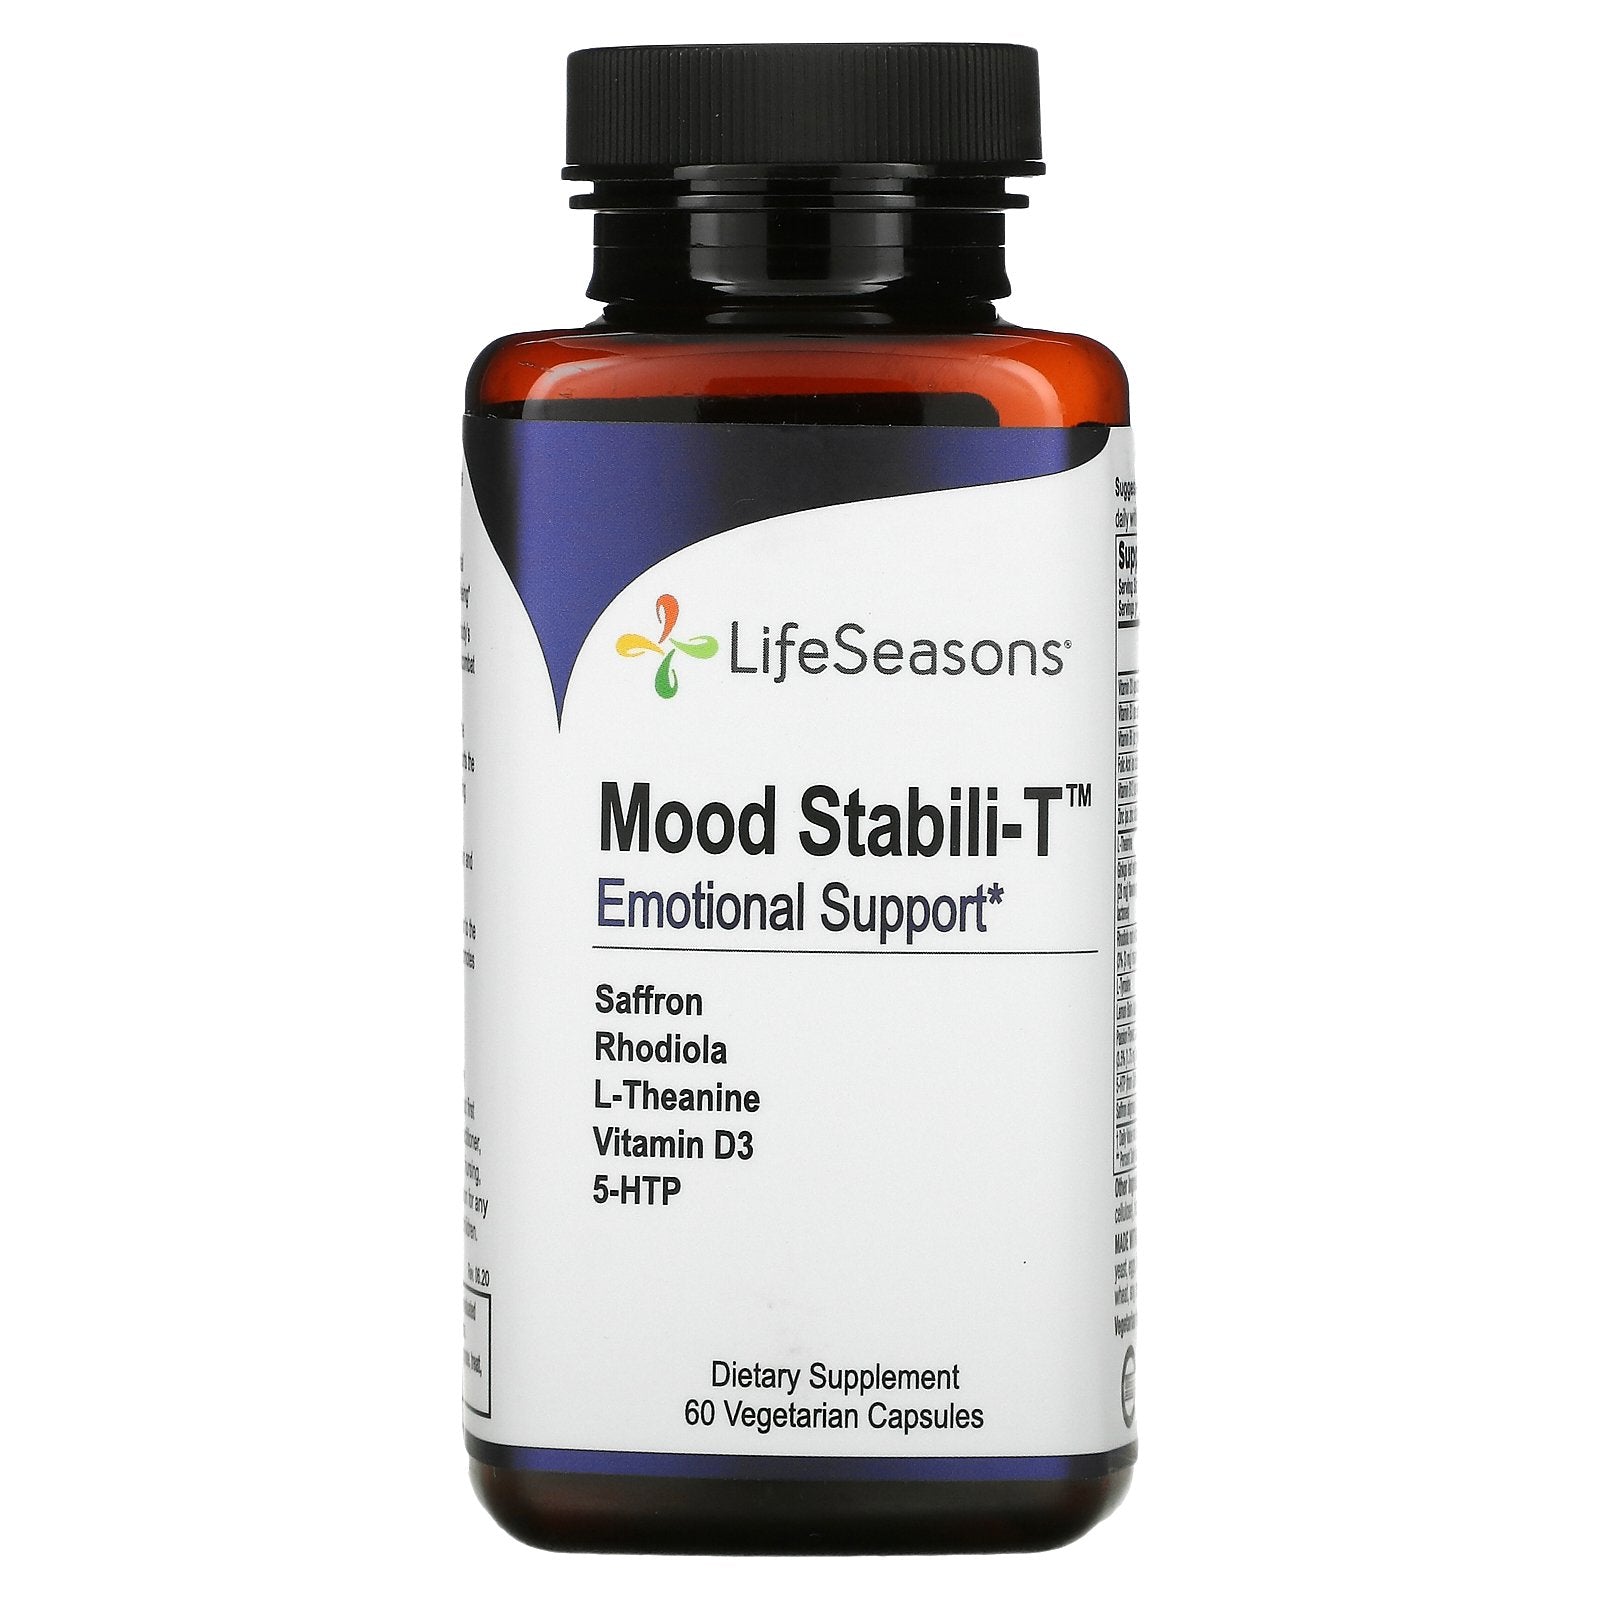 Mood Stabili-T Emotional Support